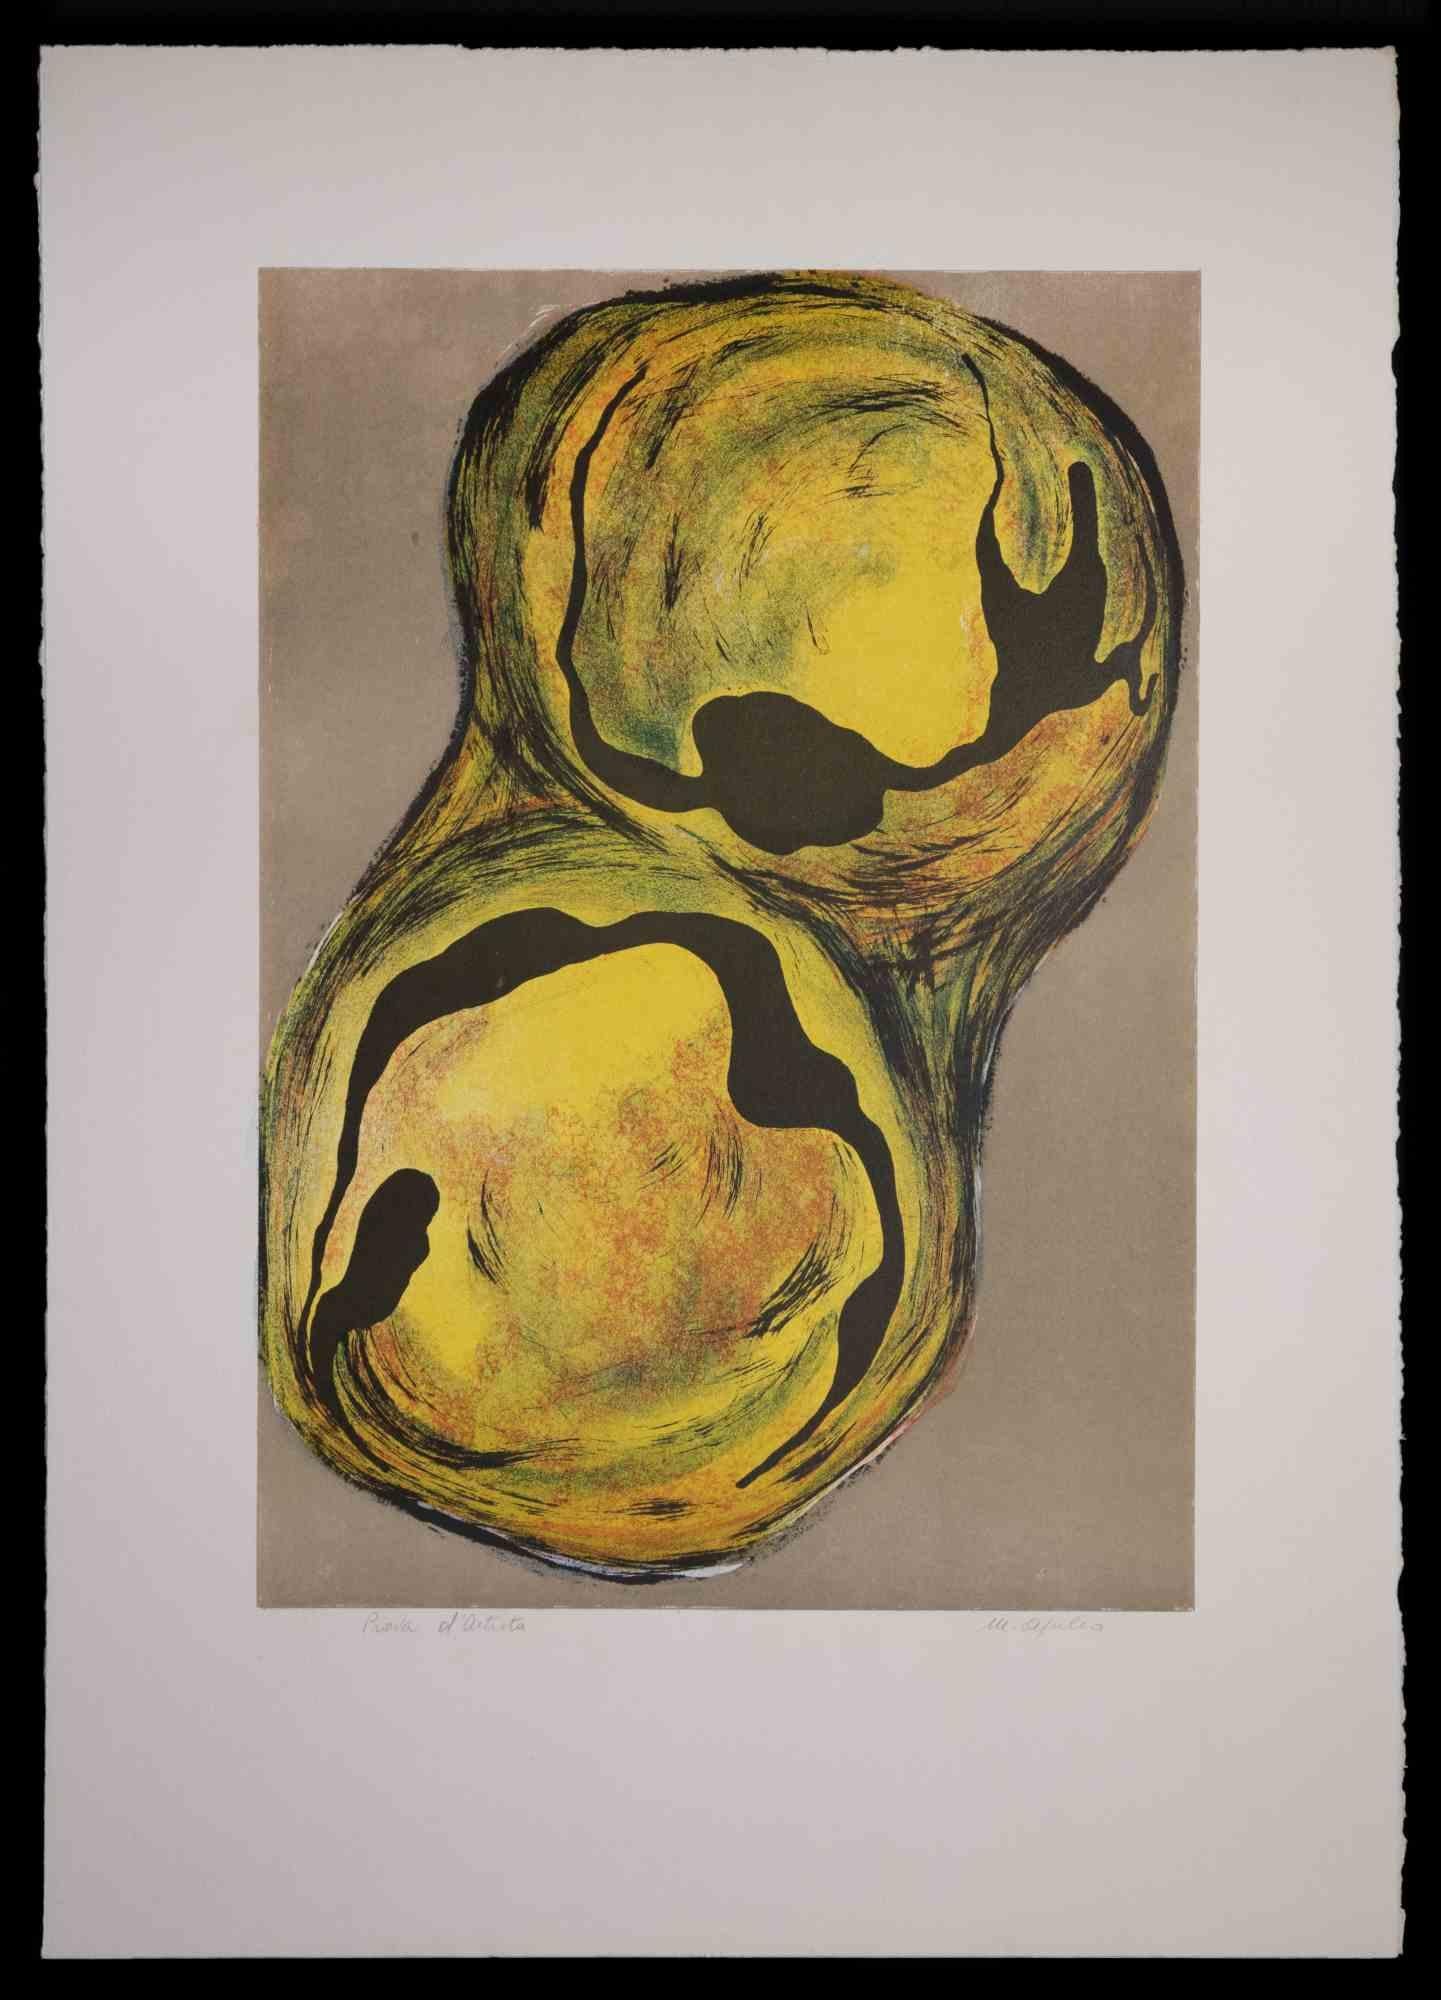 Cellula III is an original lithograph, realized by Vito Apuleo in the 1970s.

Hand-signed on the bottom right. Artist's proof as hand written by the artist on the lower left.